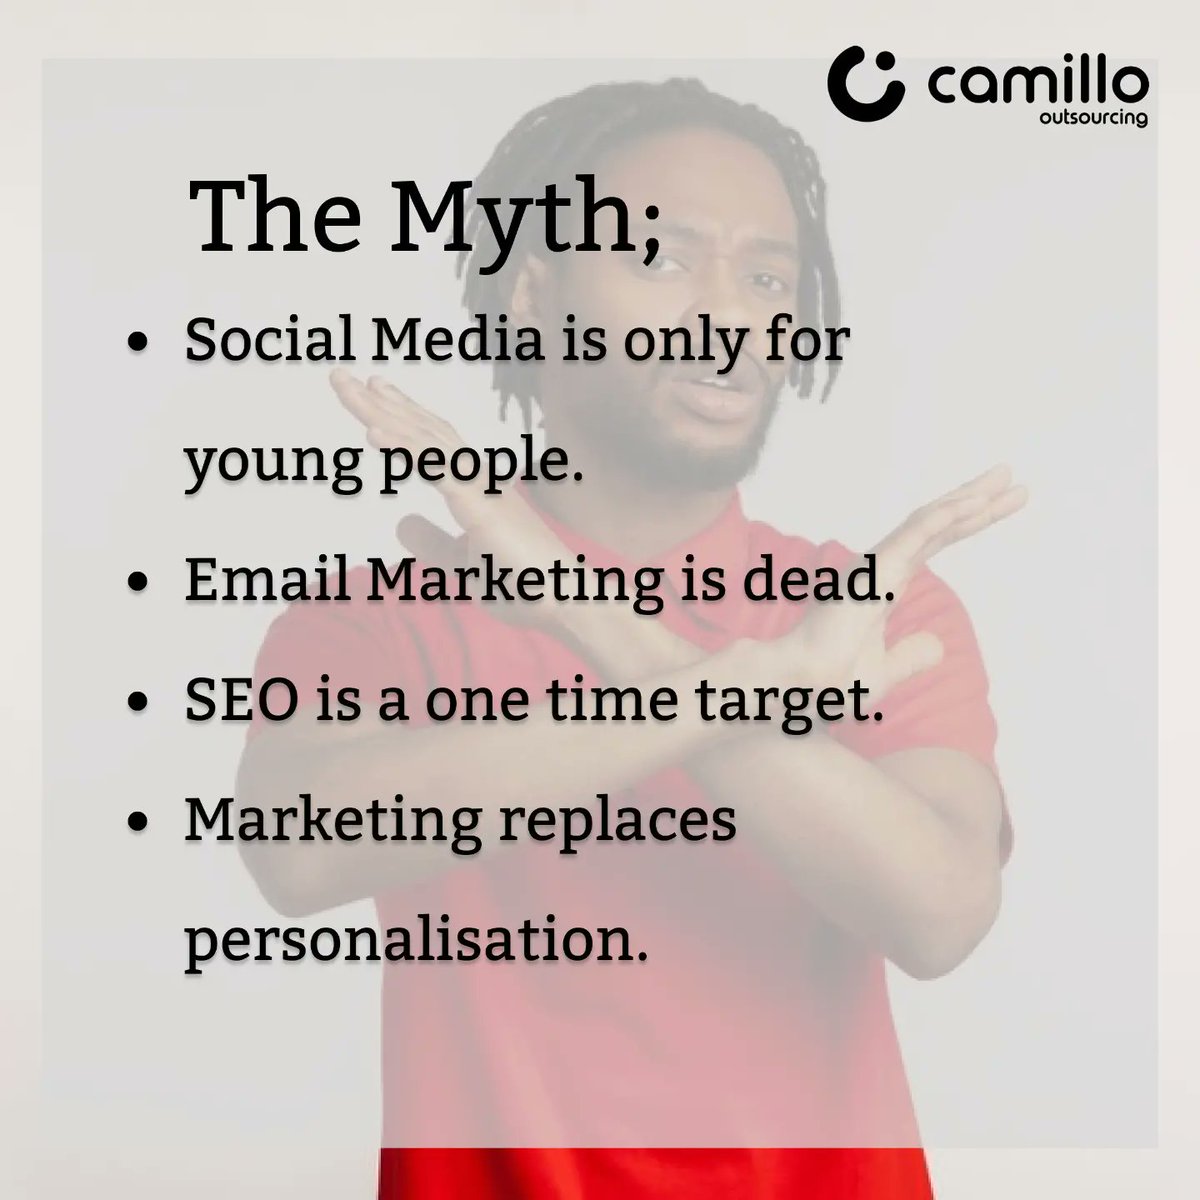 So when you seek industry knowledge do you carry the myths along too?

Are these marketing myth true? 
Which of them do you believe and practice.

#camillo #outsourcing #myth #marketingmyths 
#marketingactivities #marketing #goodmarketing